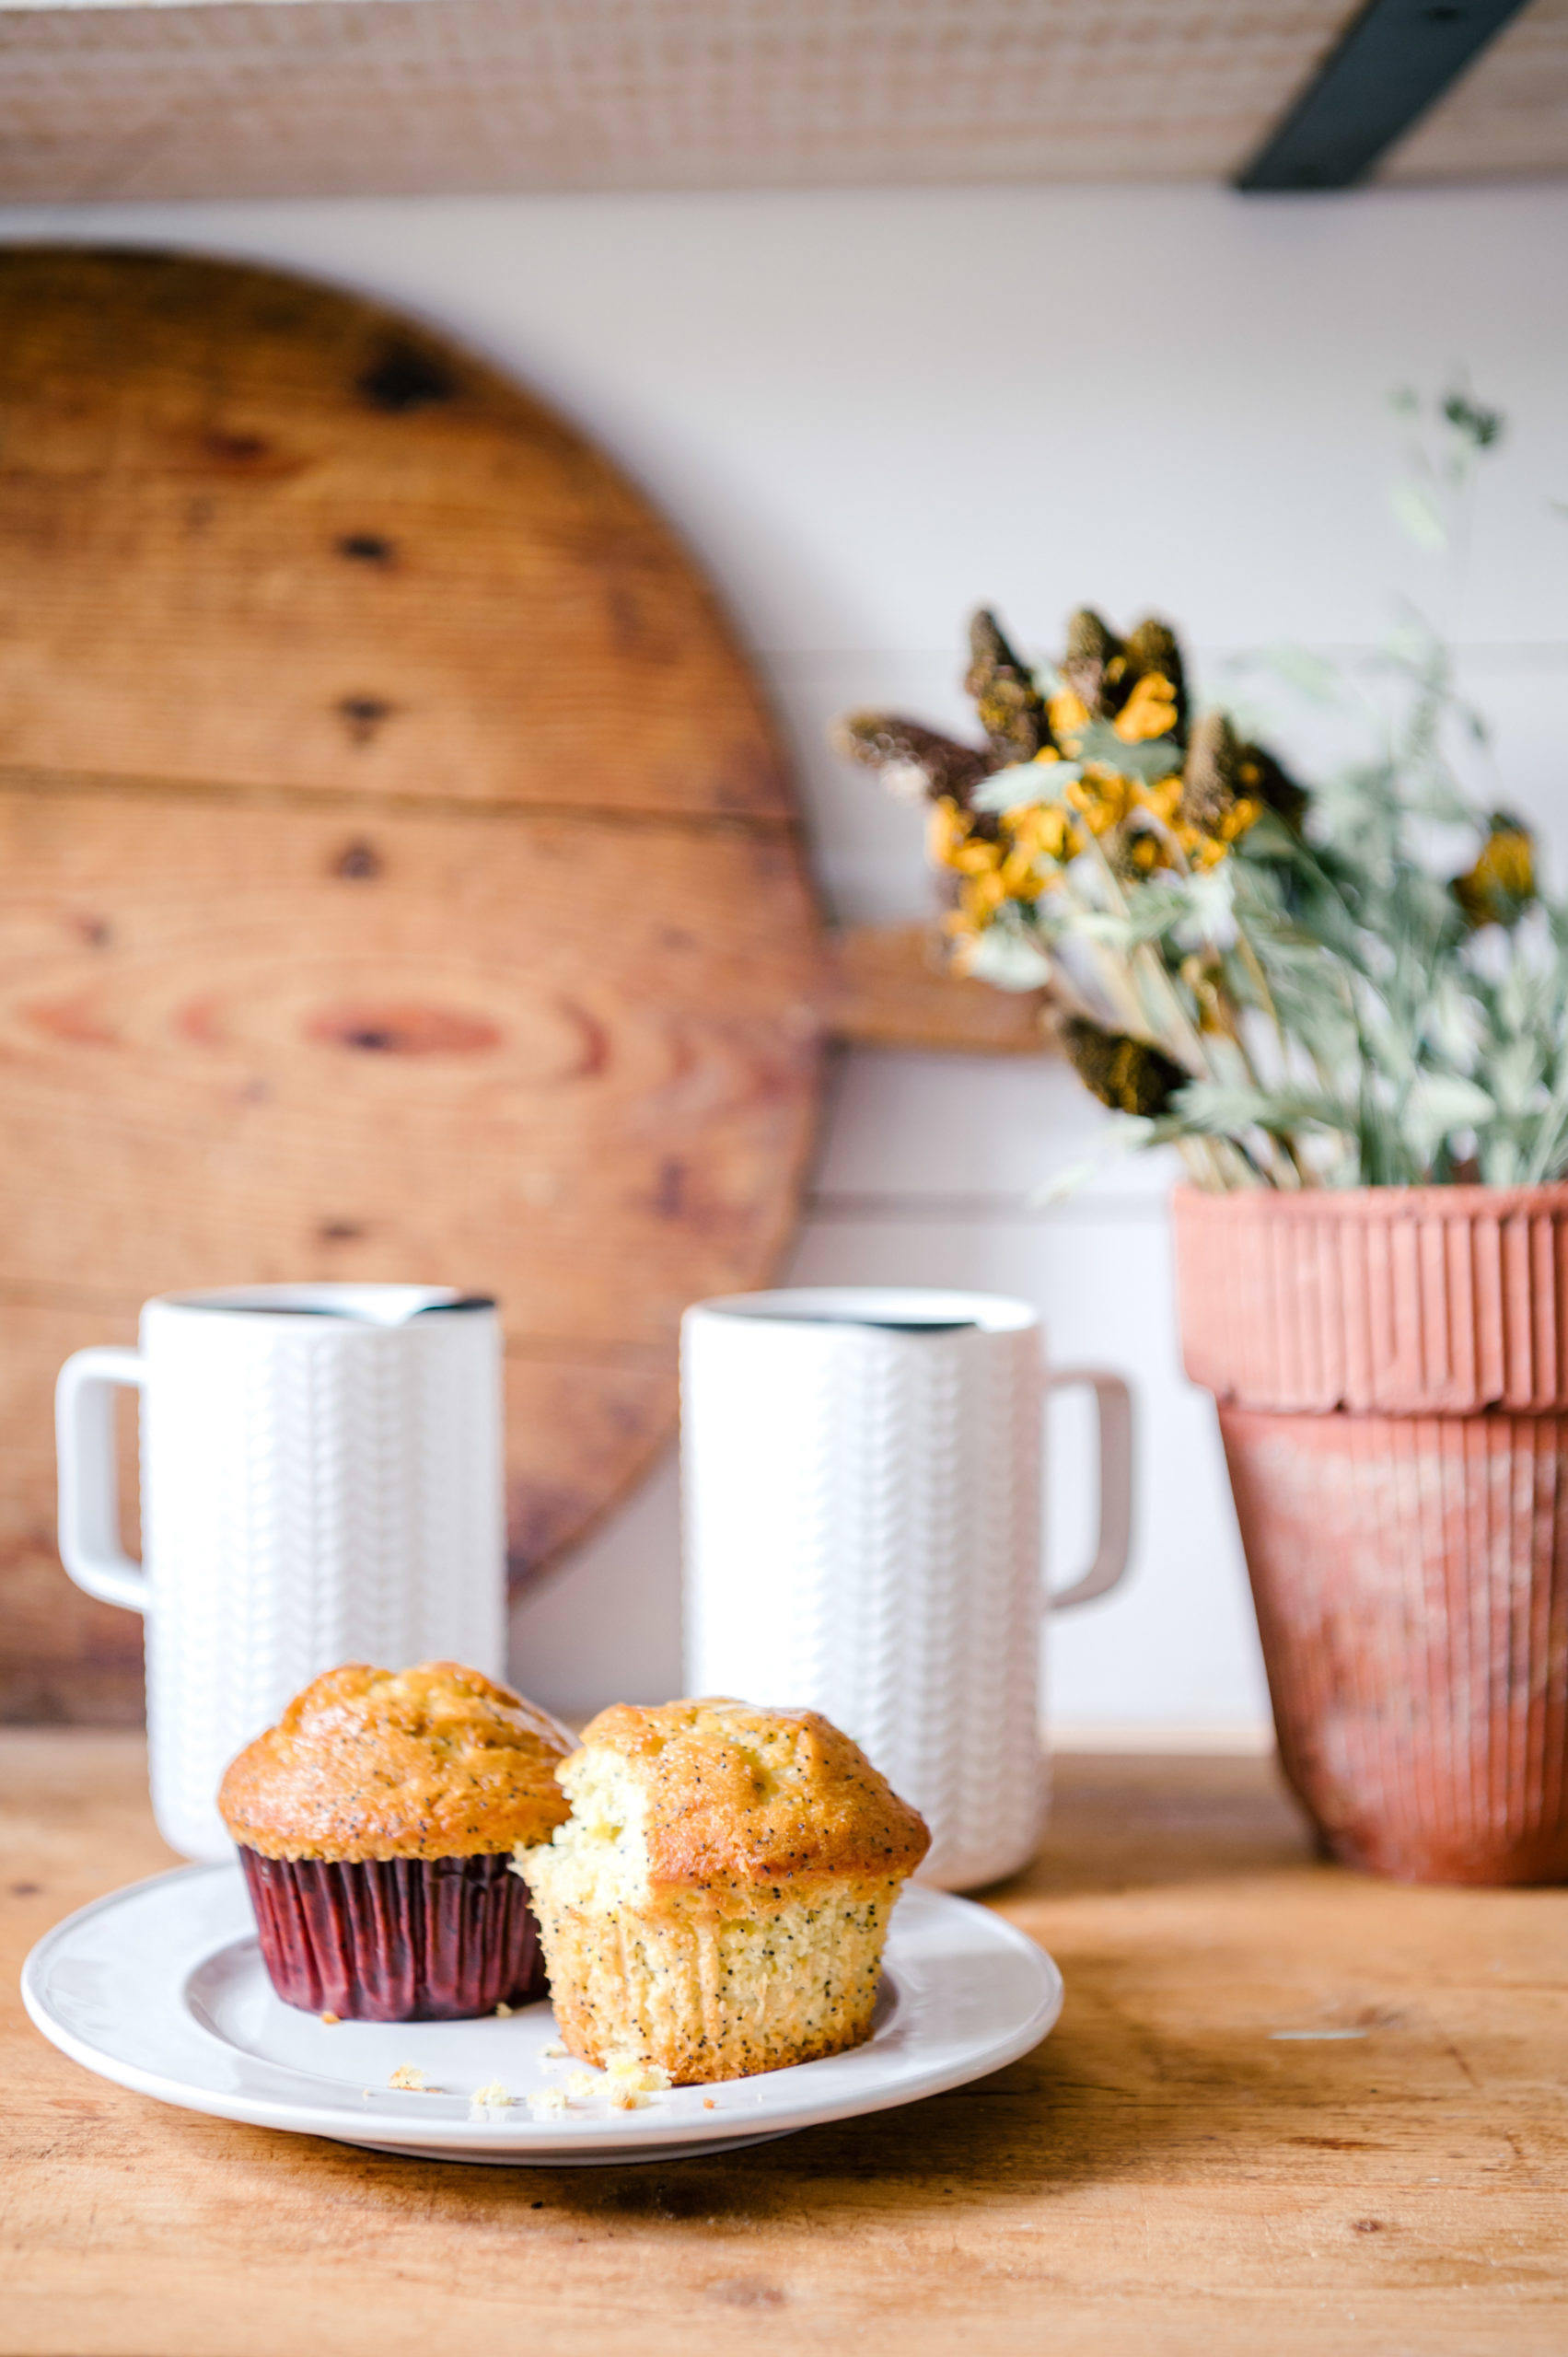 Muffins on white plate and two white mugs sitting on a wooden table